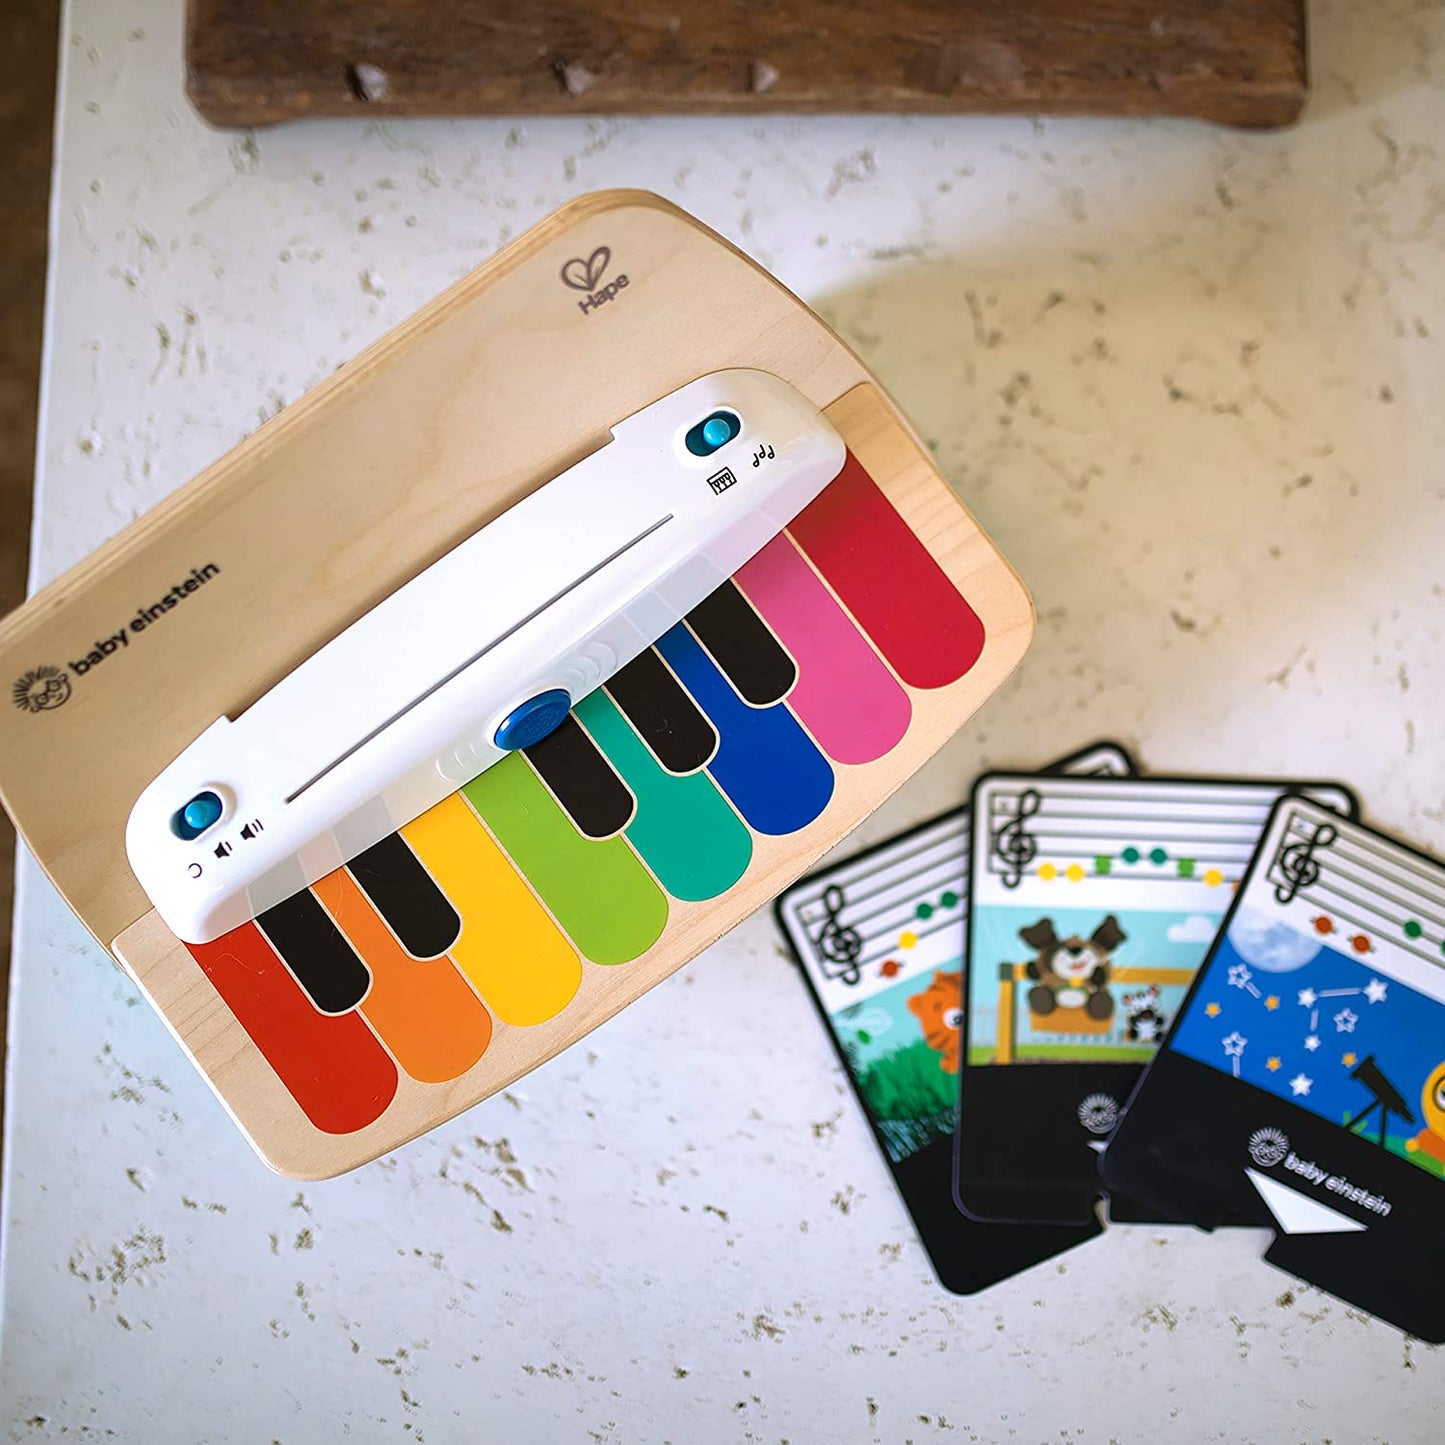 "Enchanting Hape Magic Touch Piano: a Musical Delight for Toddlers, 6 Months and Beyond!"